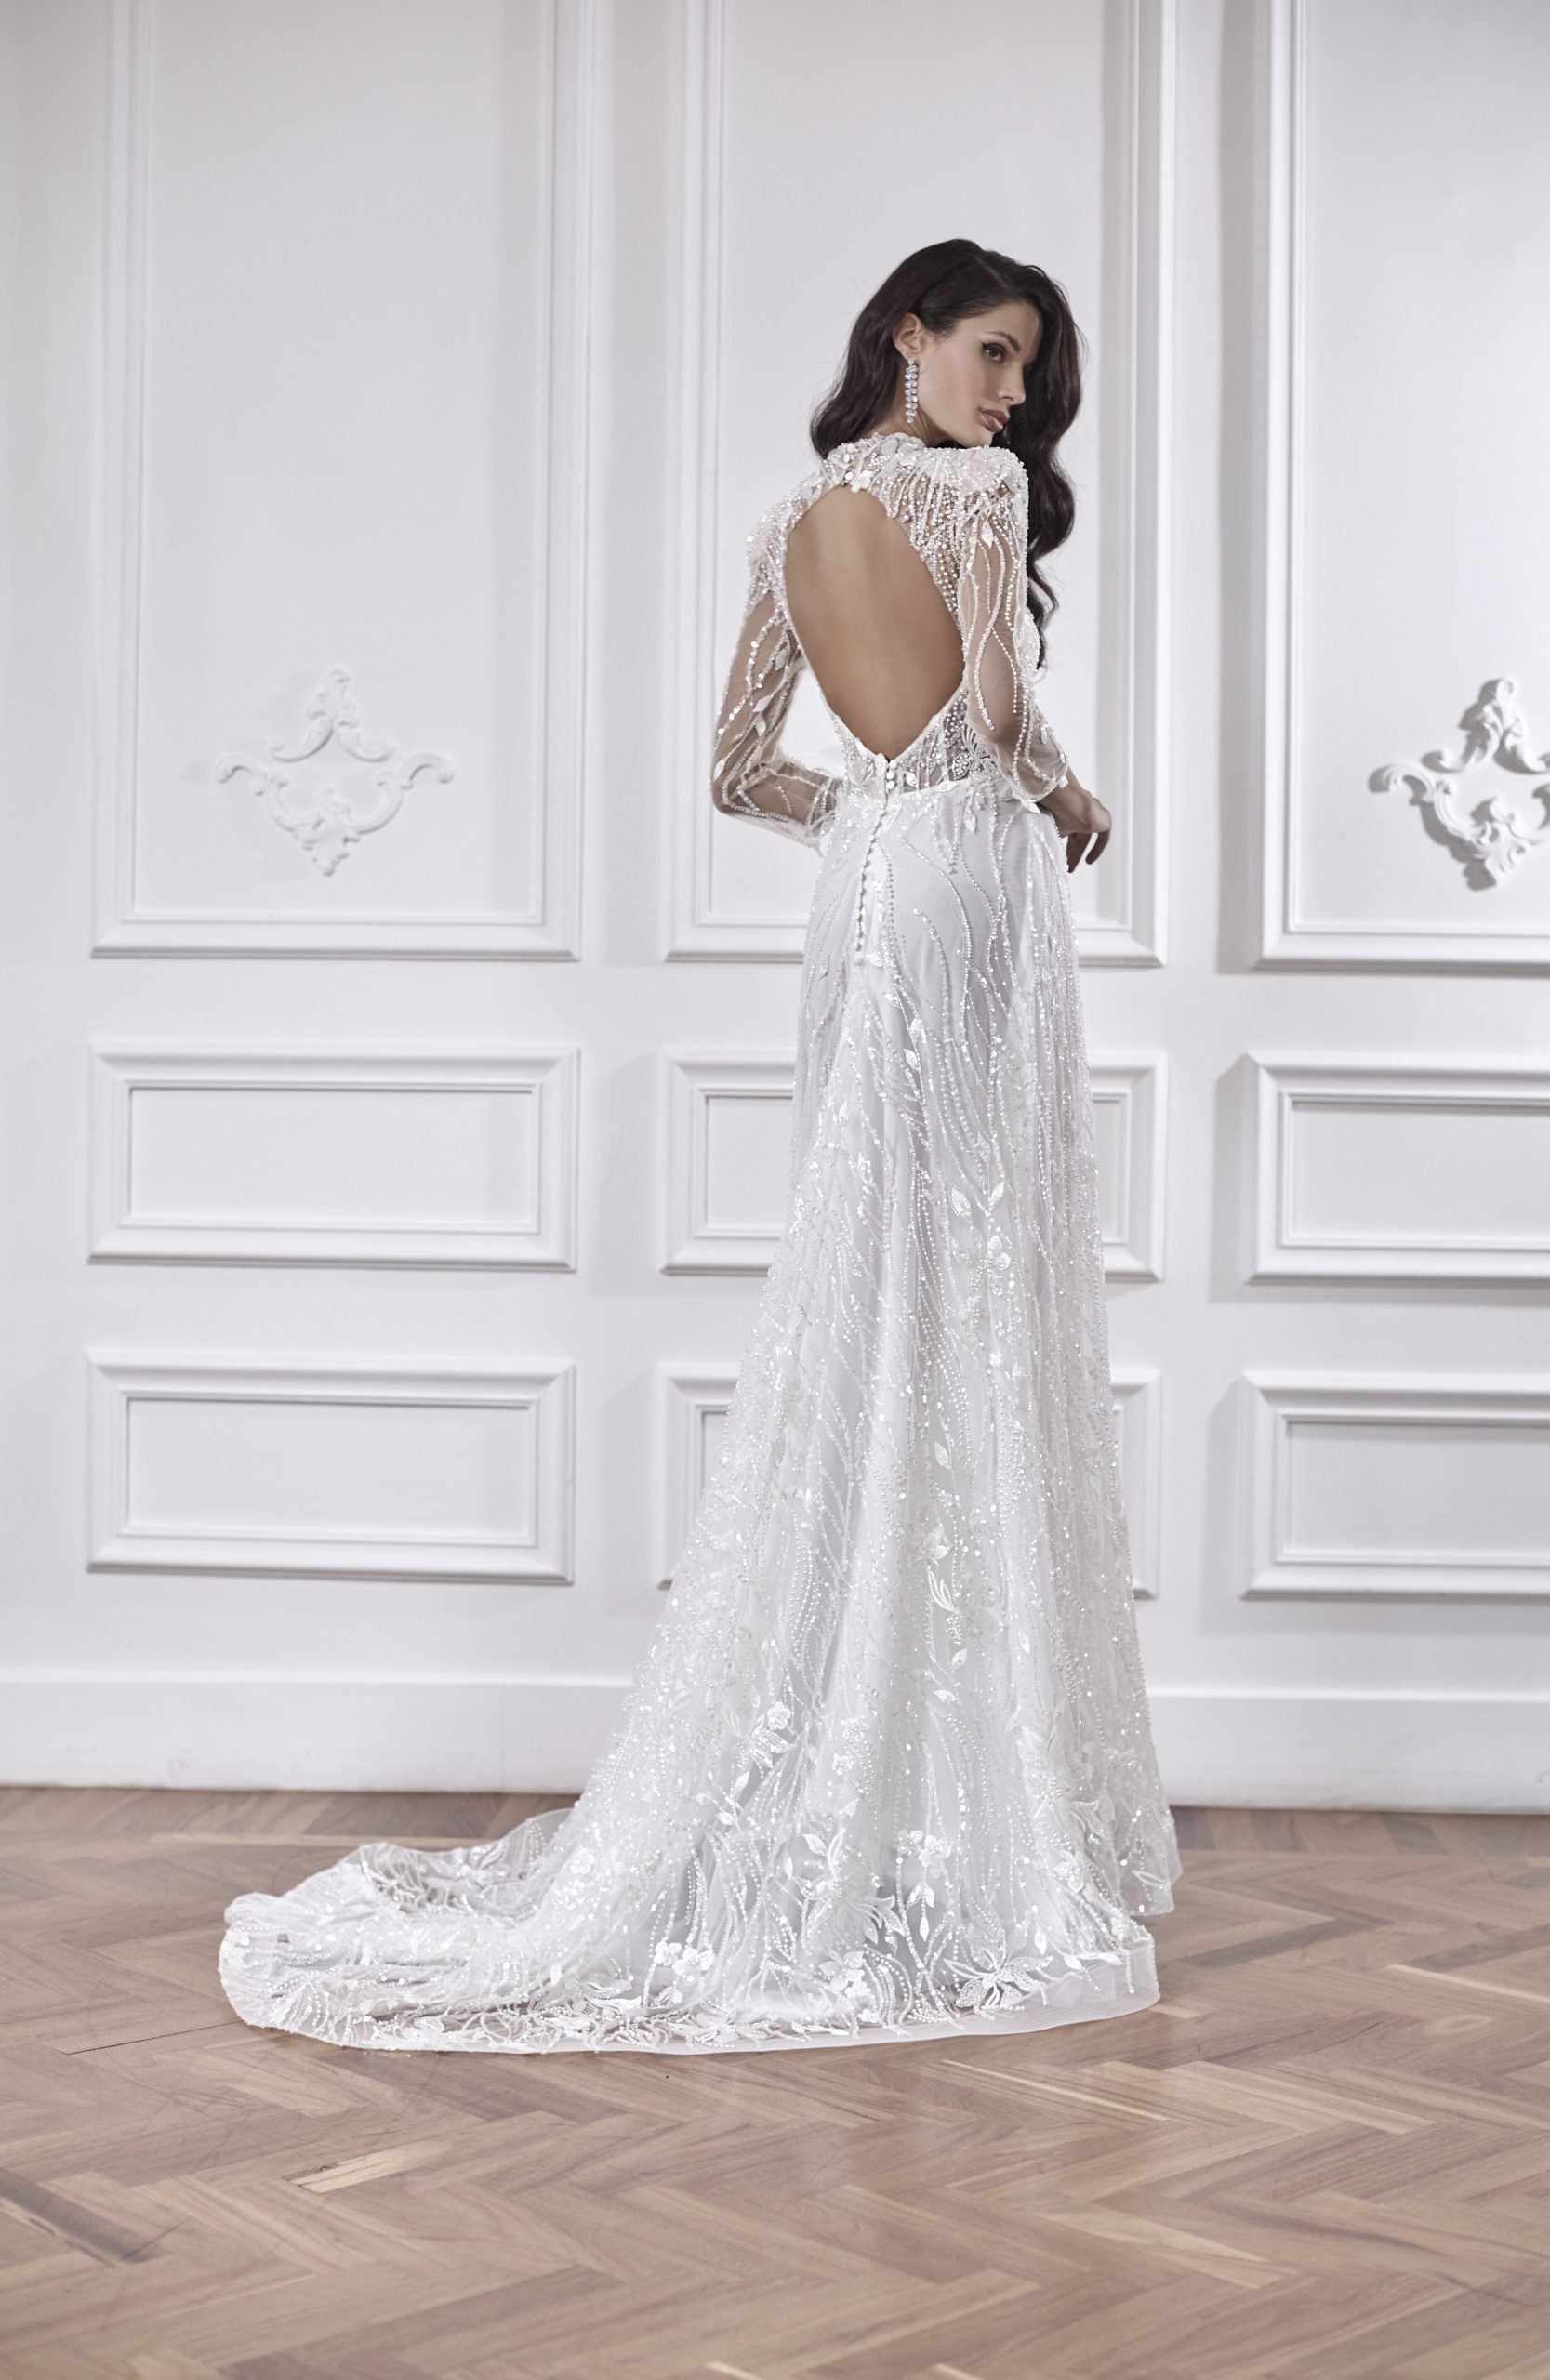 Beaded A-line Wedding Dress With Deep V-neckline And Illusion Long Sleeves by Maison Signore - Image 2